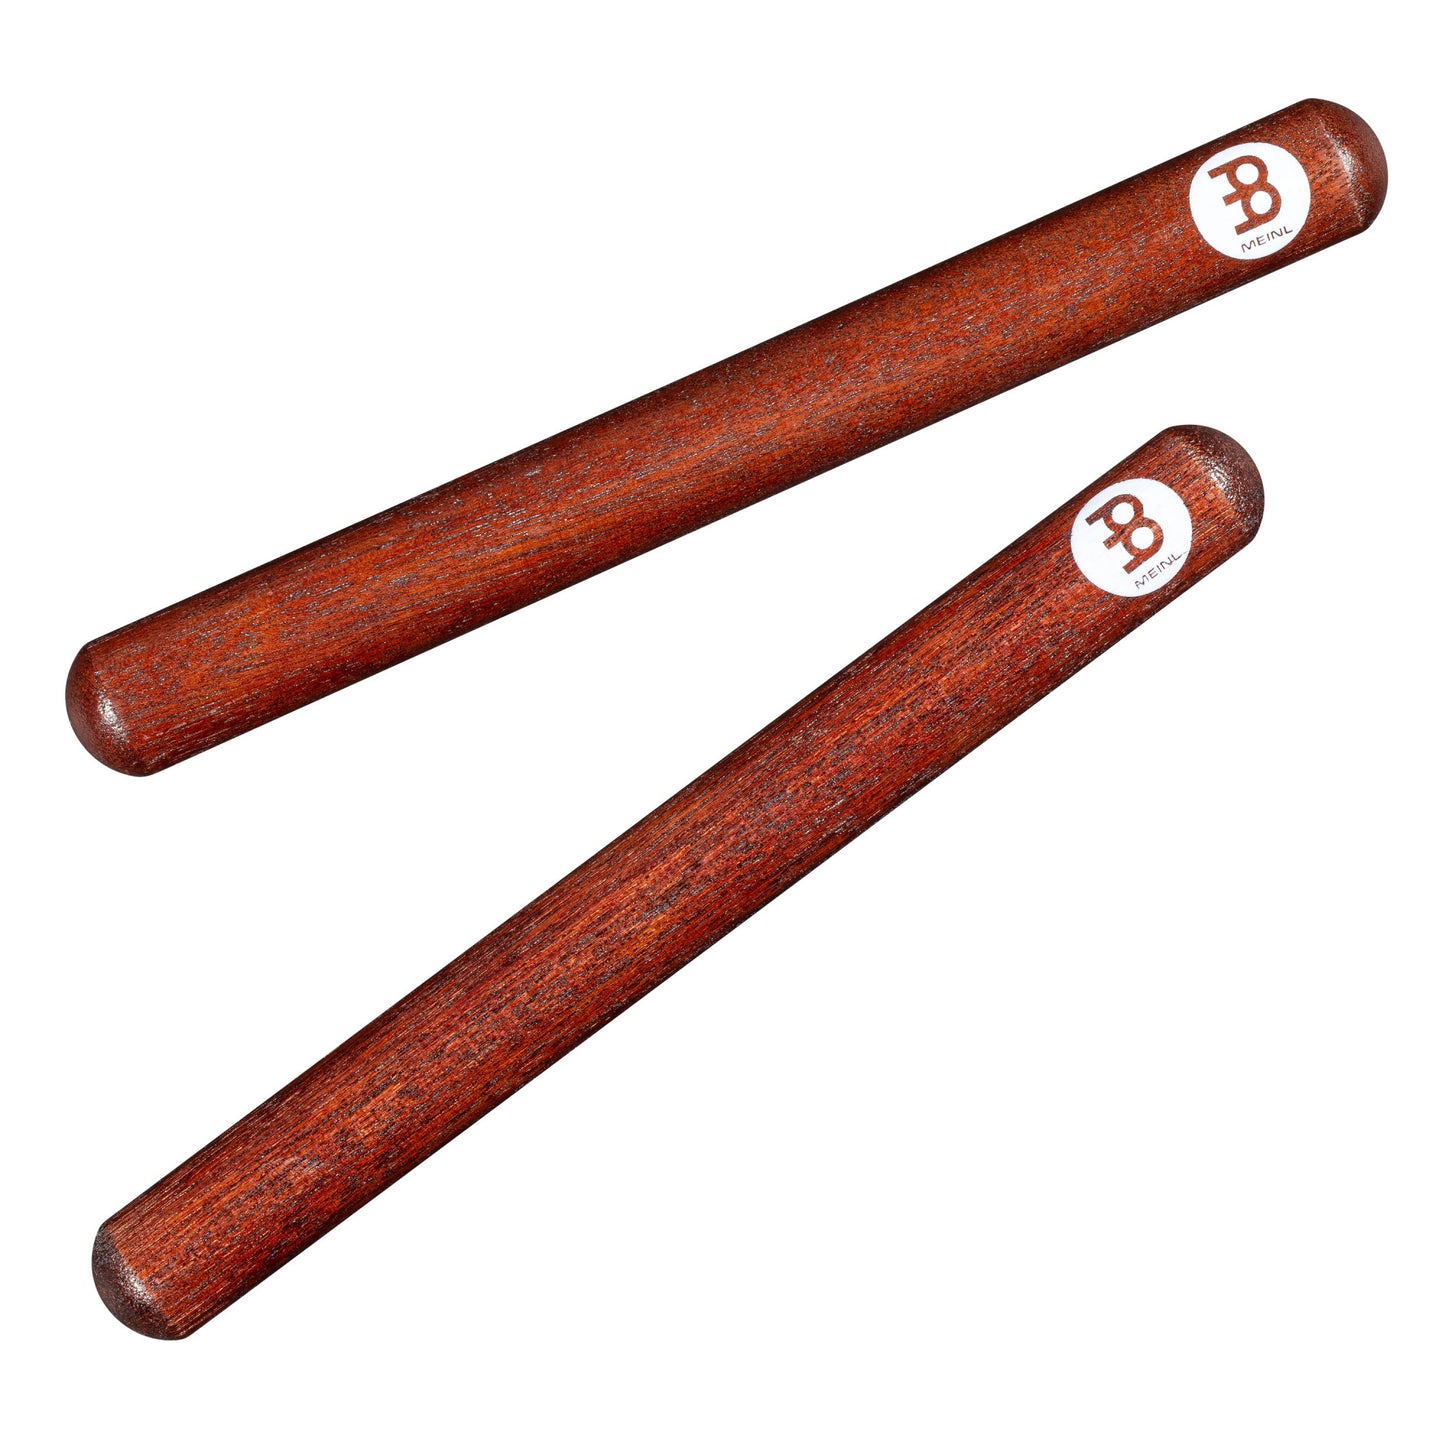 MEINL Percussion Clave DeLuxe - Dense Hardwood (NEW)